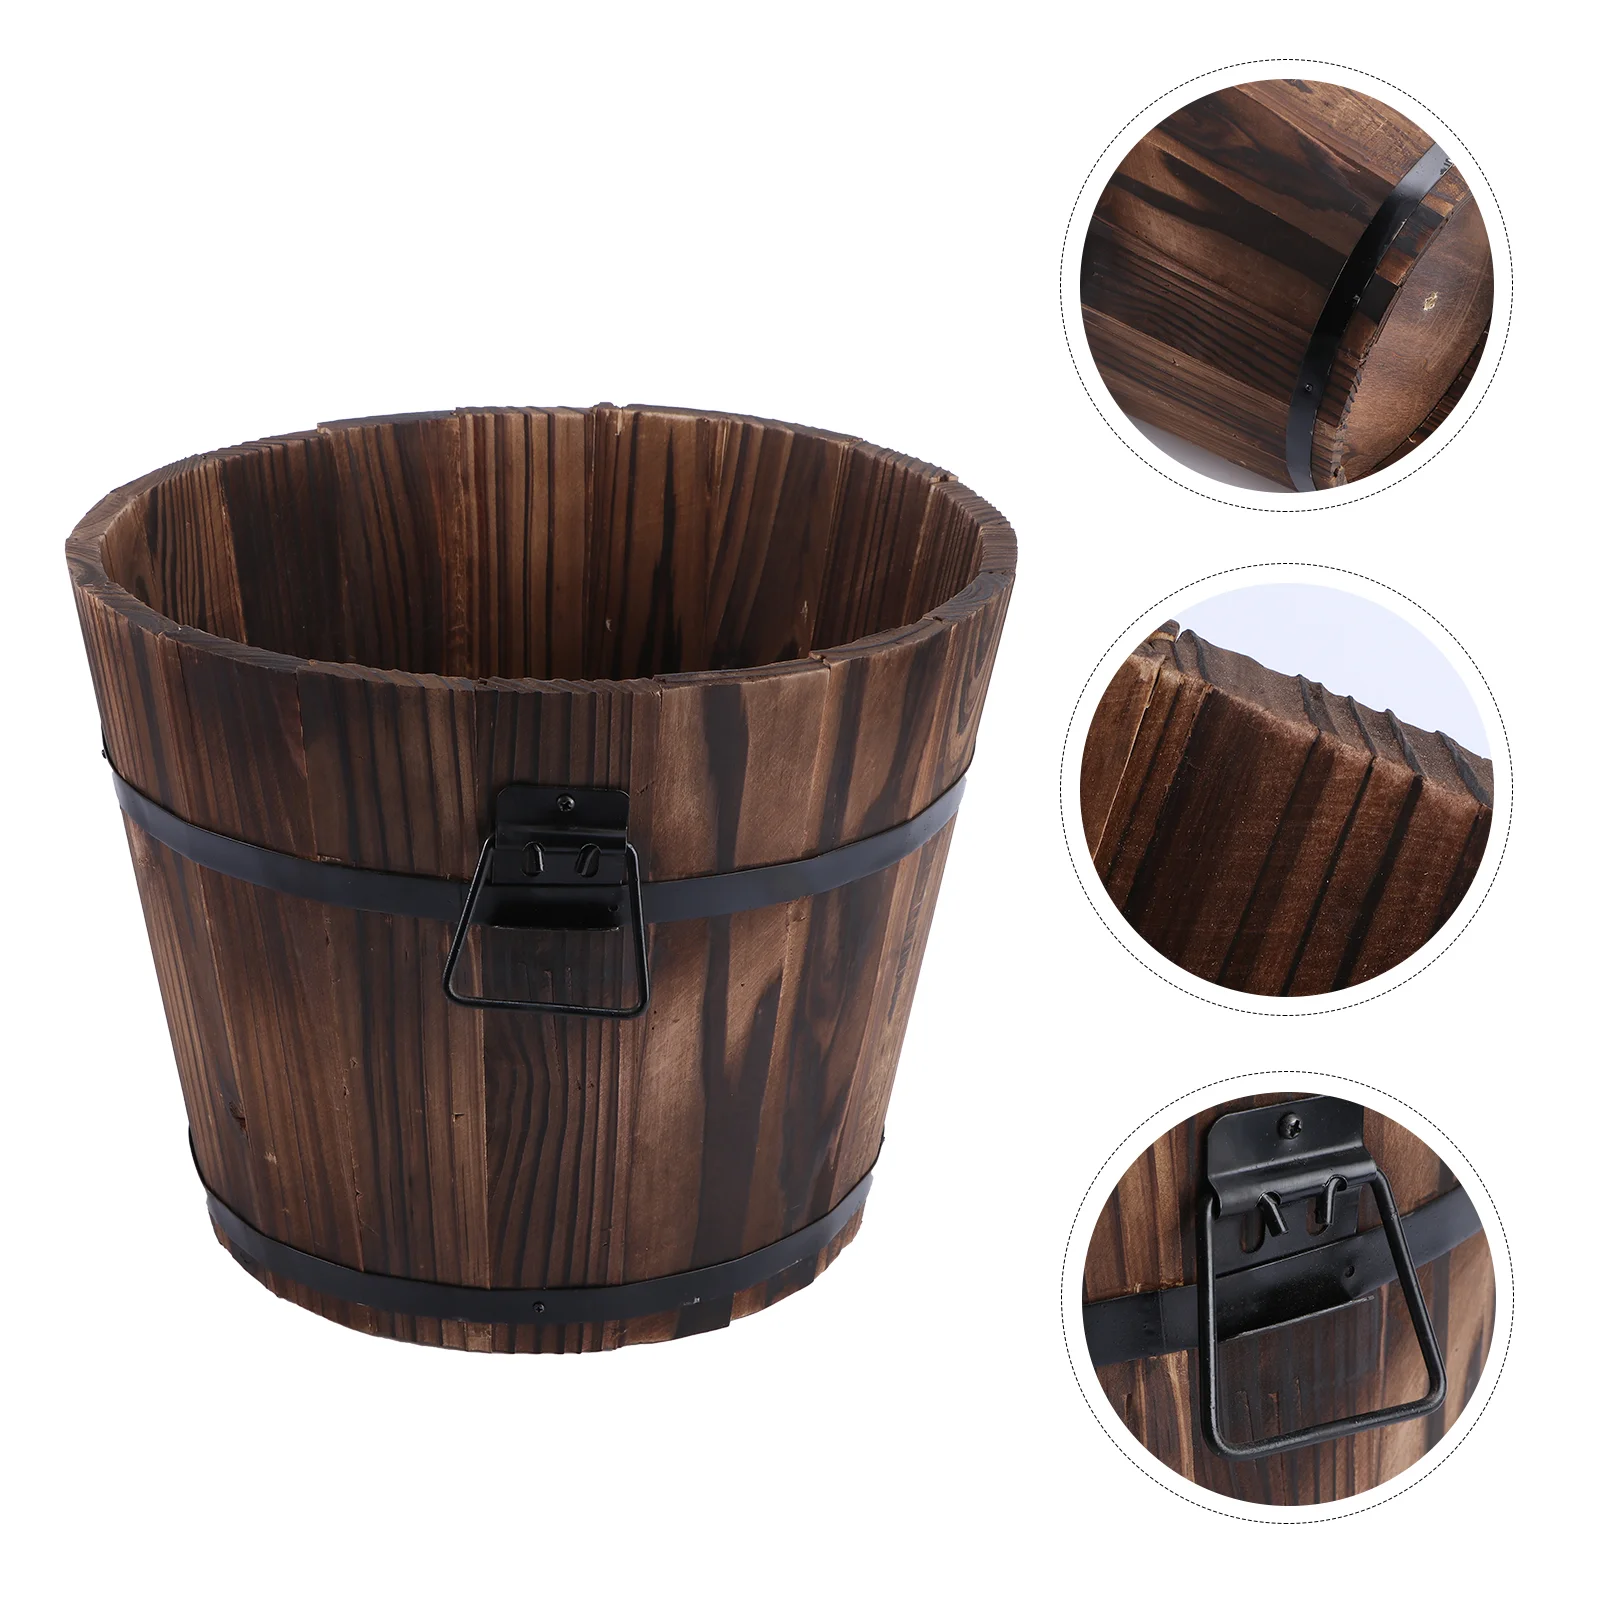 

Wooden Planter Flower Wood Pot Bucket Planters Outdoor Succulent Rustic Whiskey Box Pots Container Round Garden Boxes Decorative